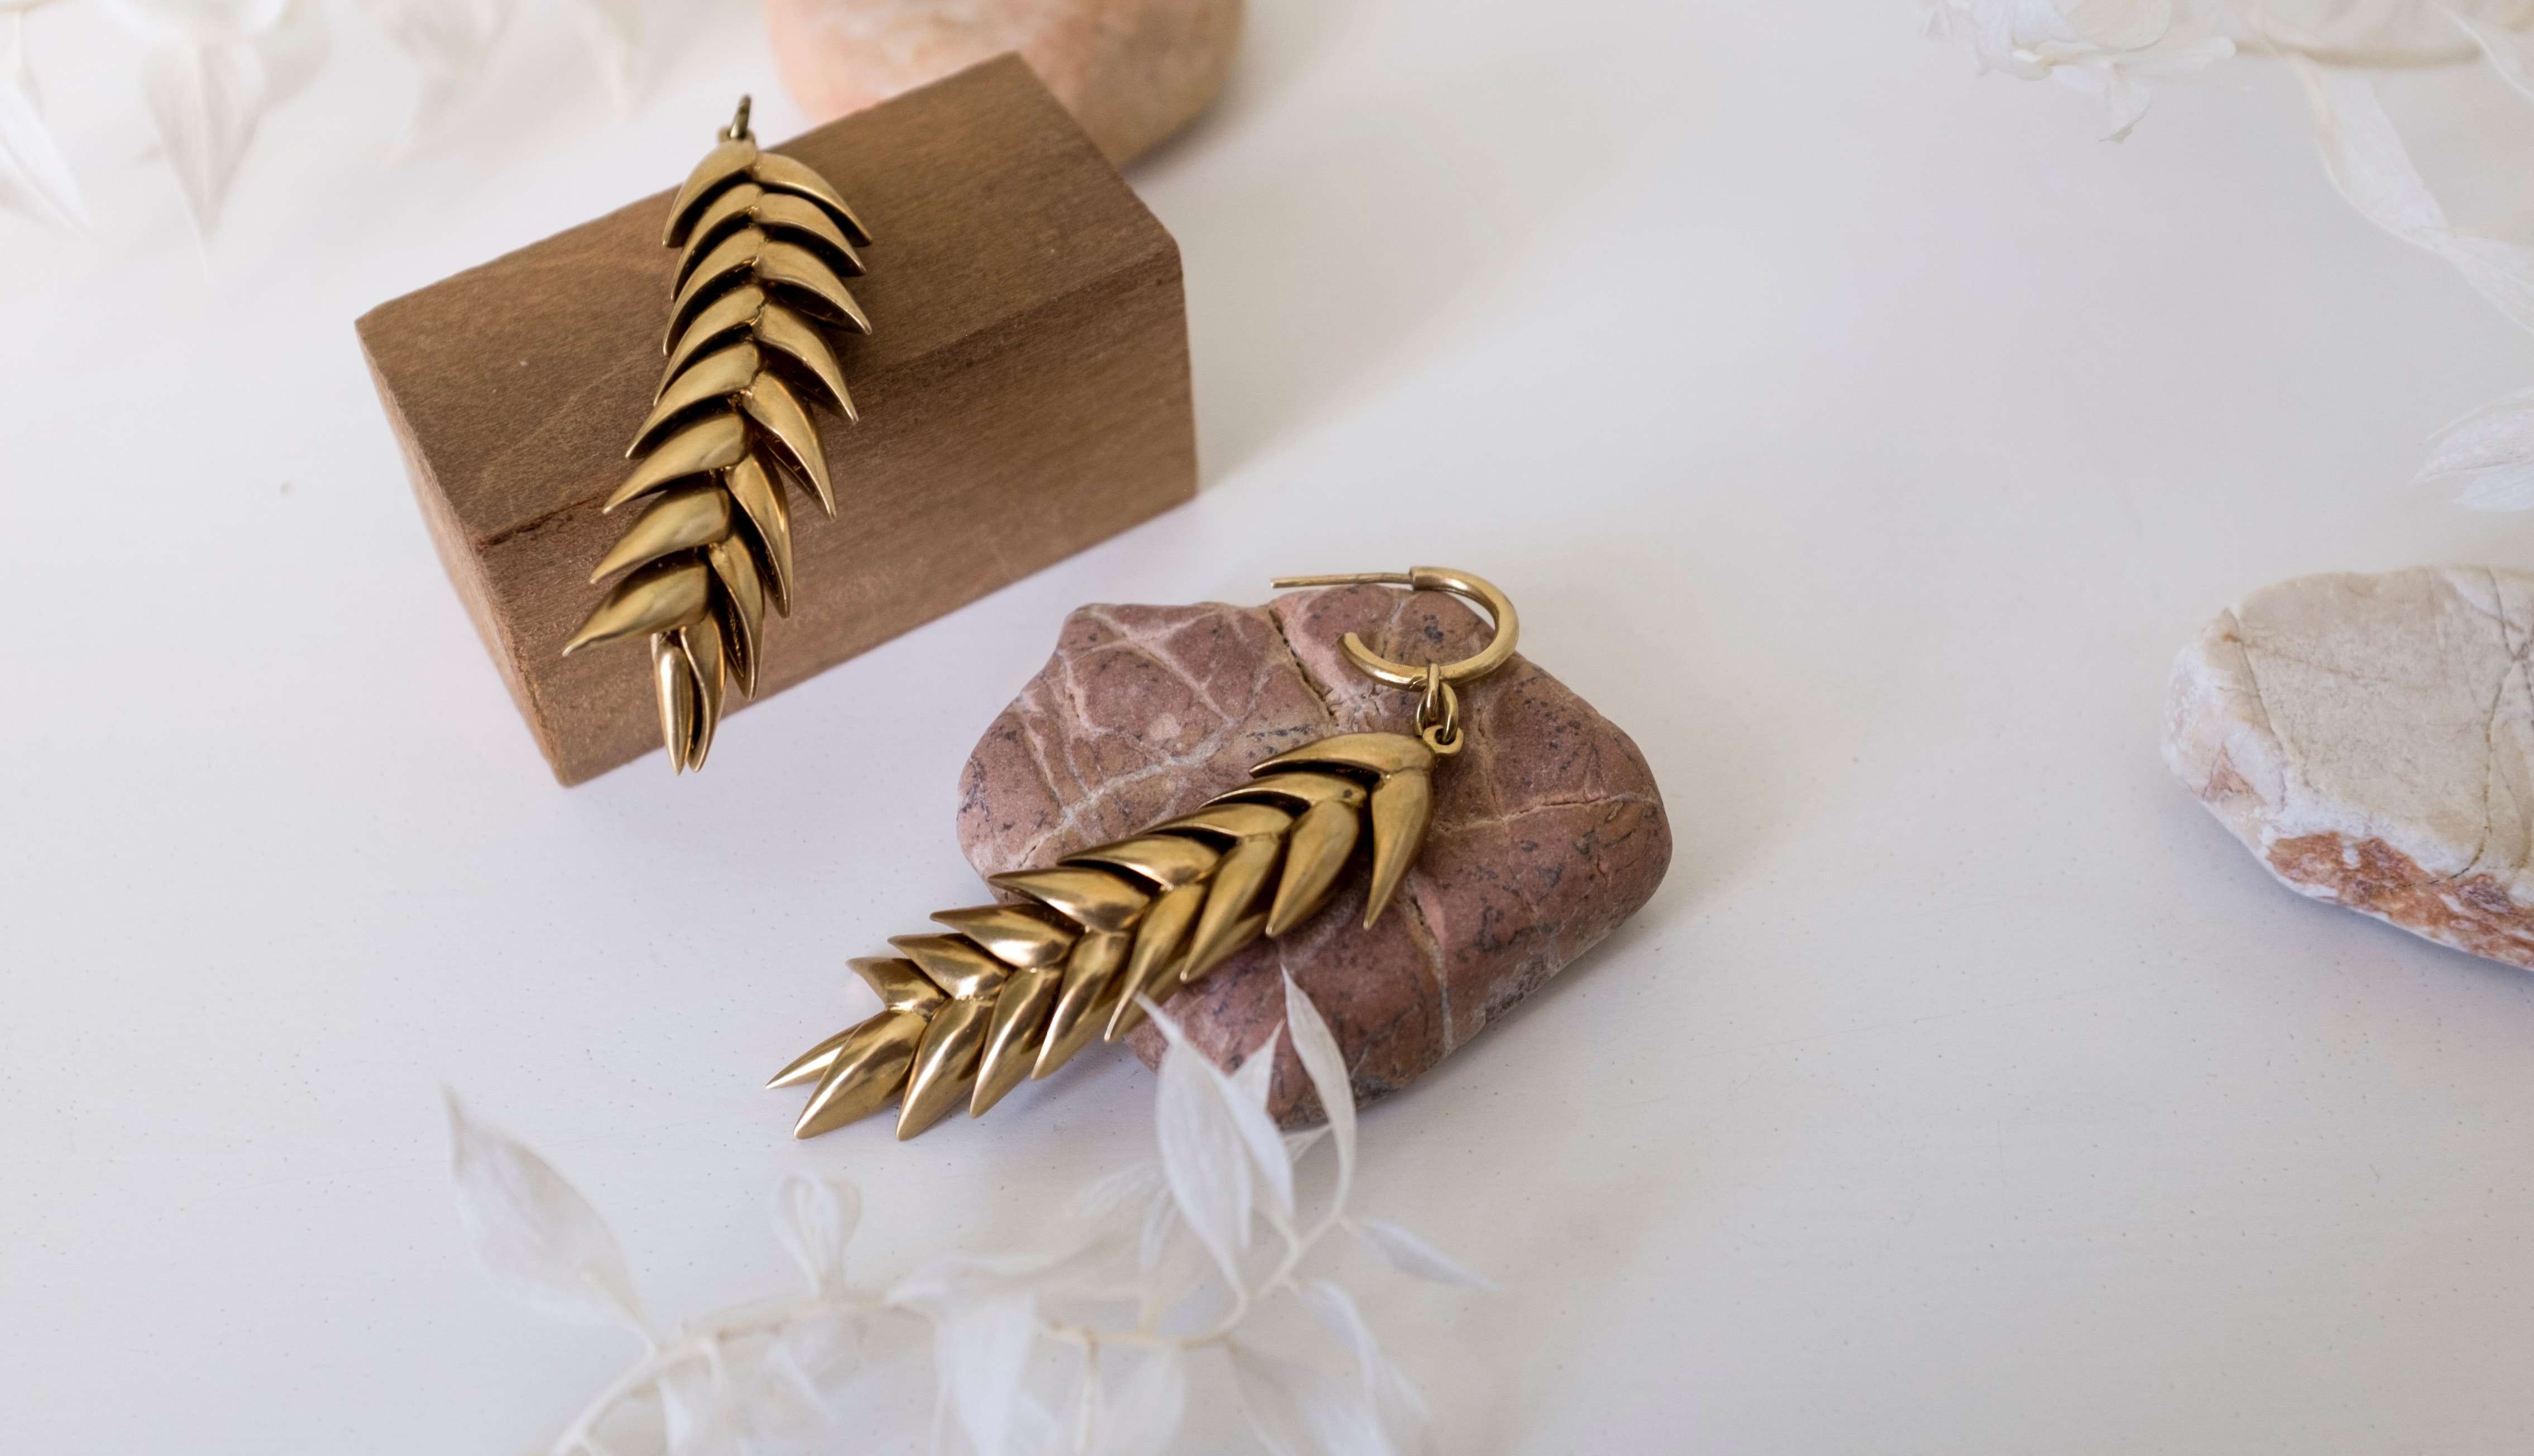 golden earrings placed over rocks and wooden blocks 